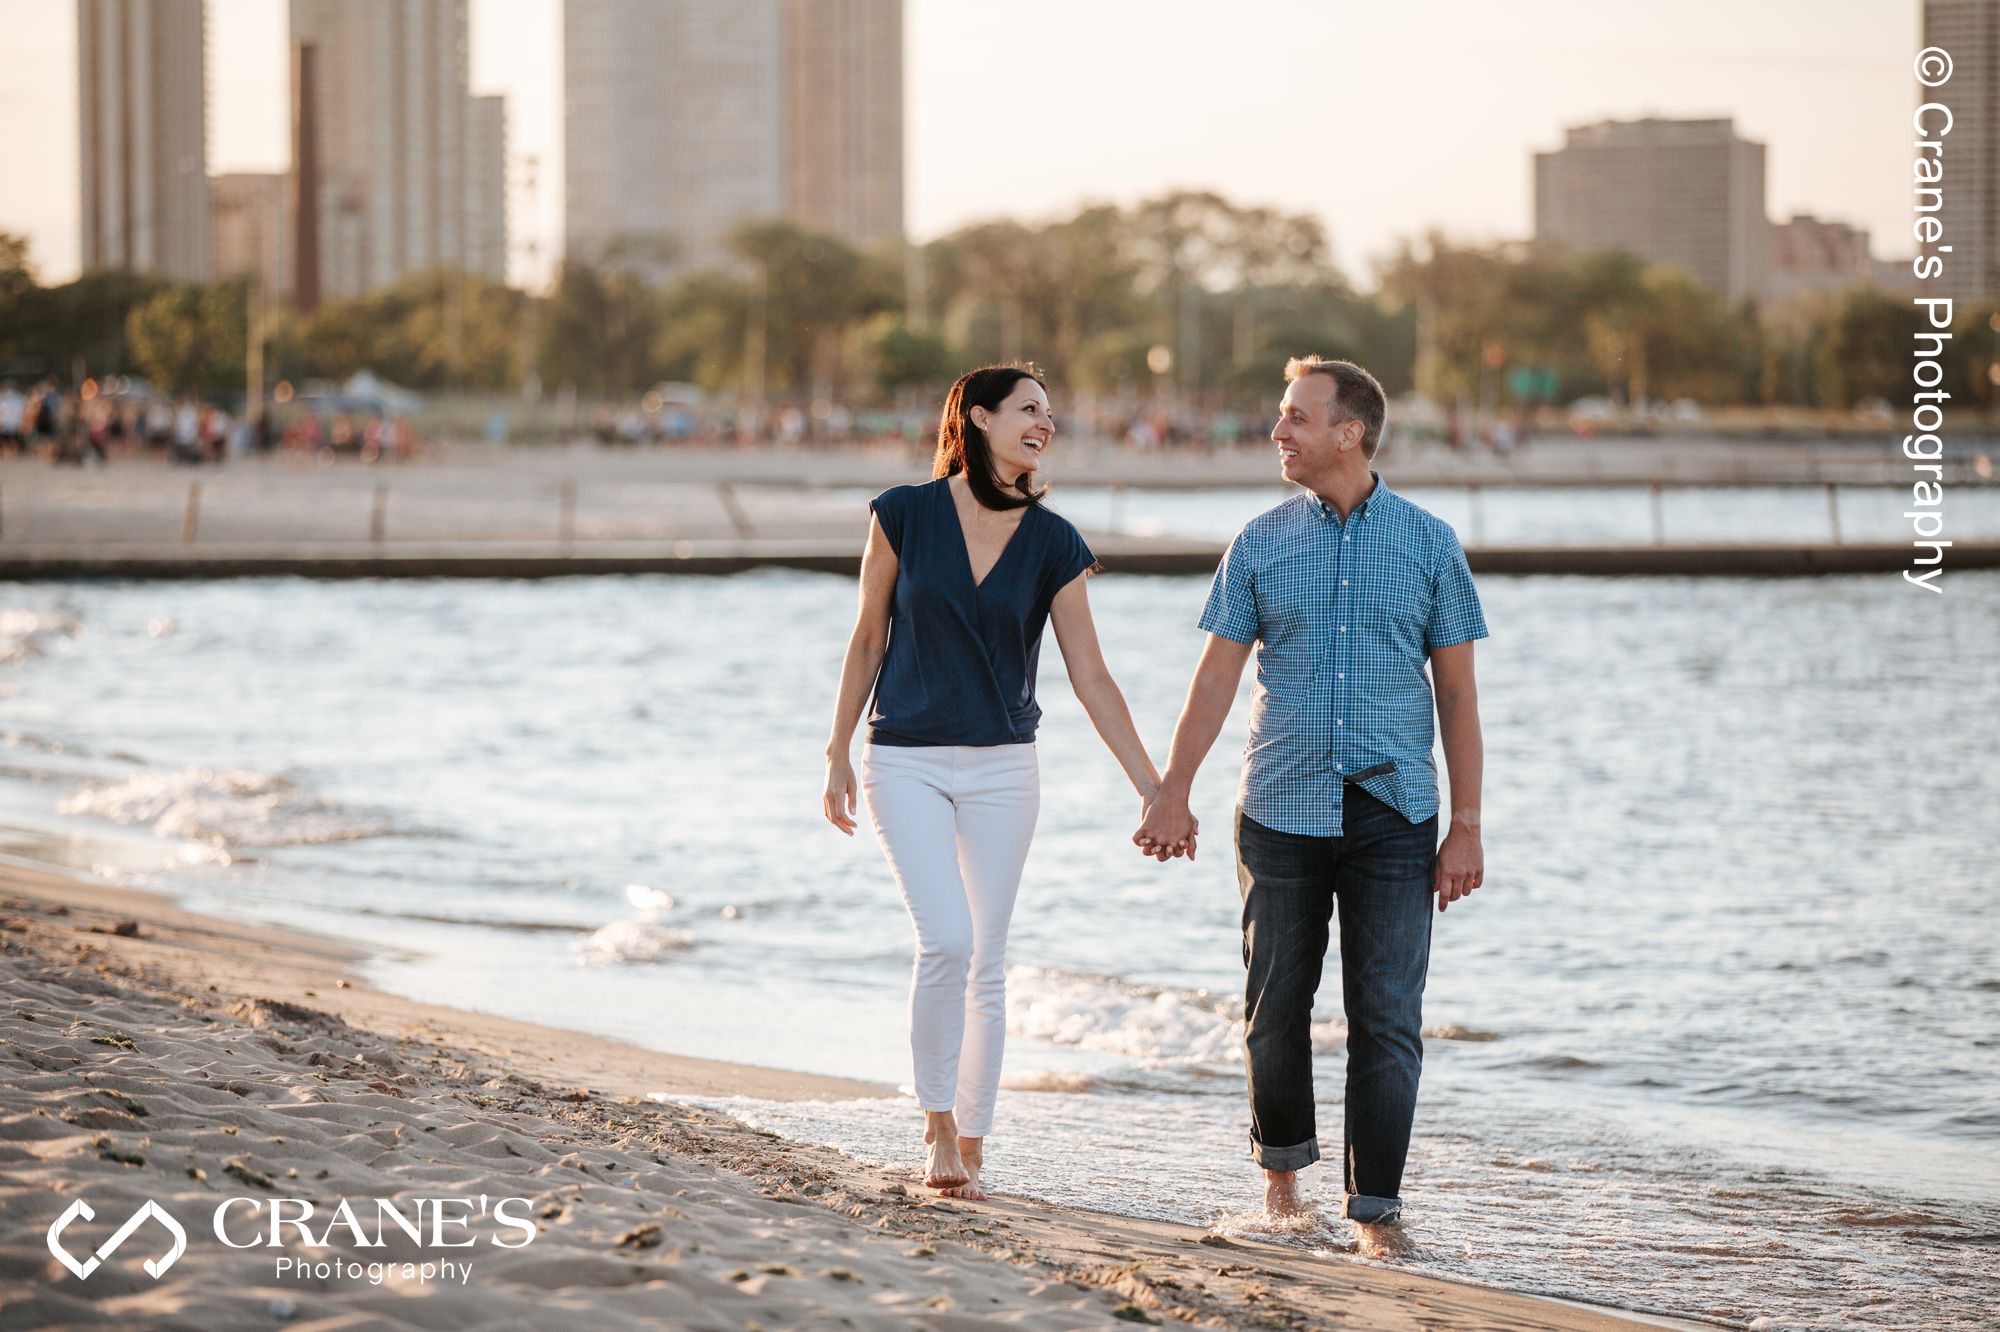 An engaged couple walk hand in hand on a beach near Chicago